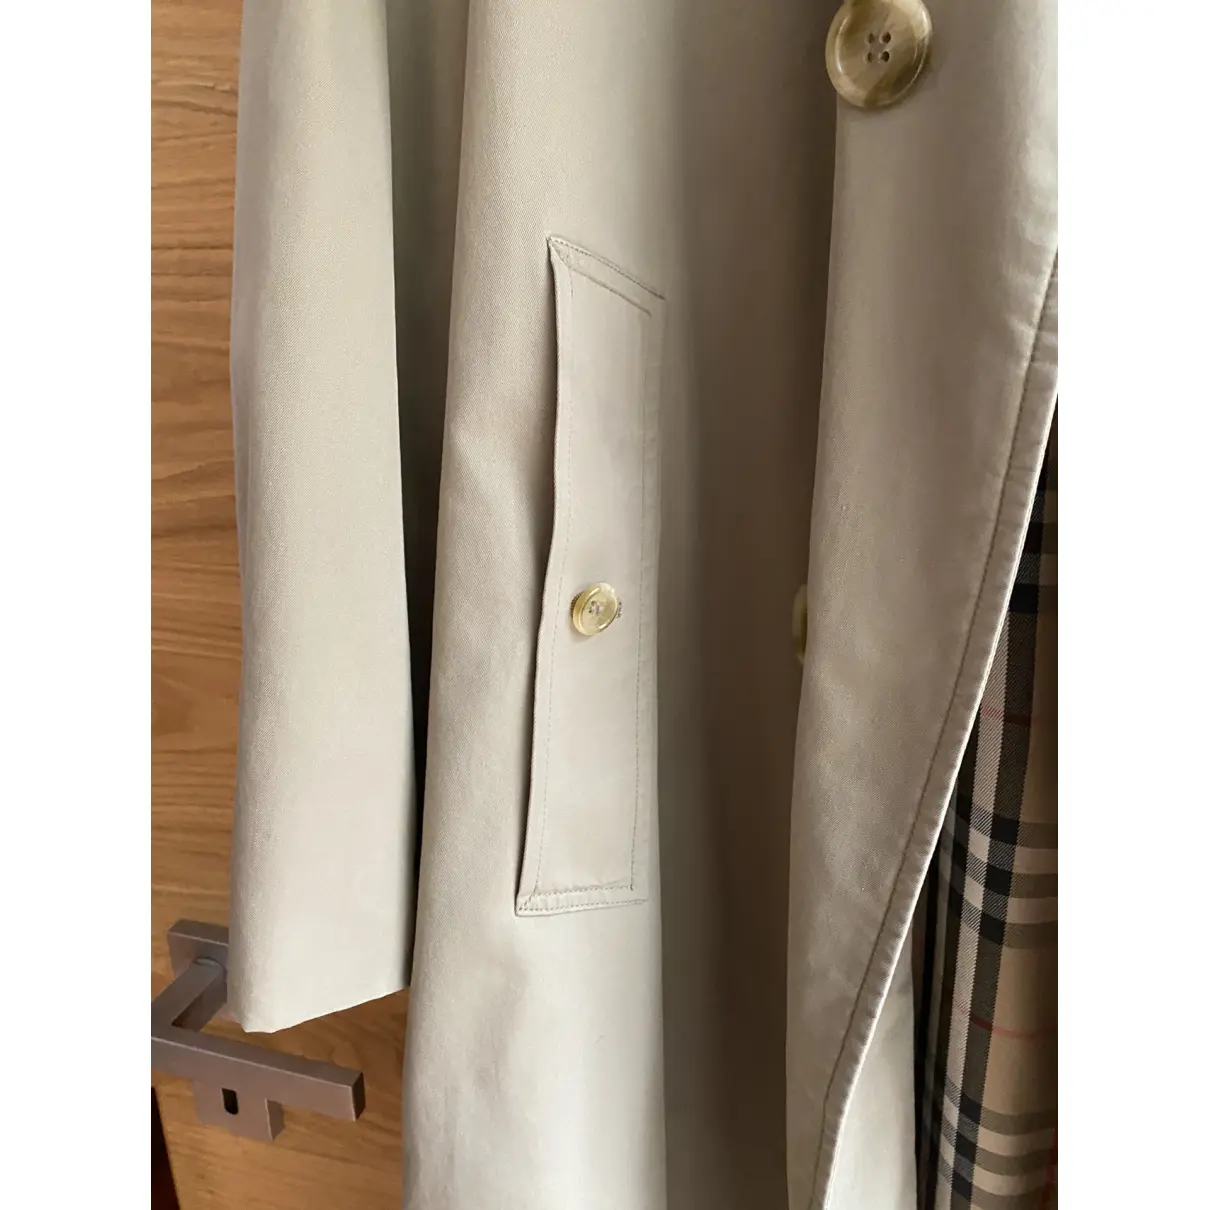 Buy Burberry Trench online - Vintage